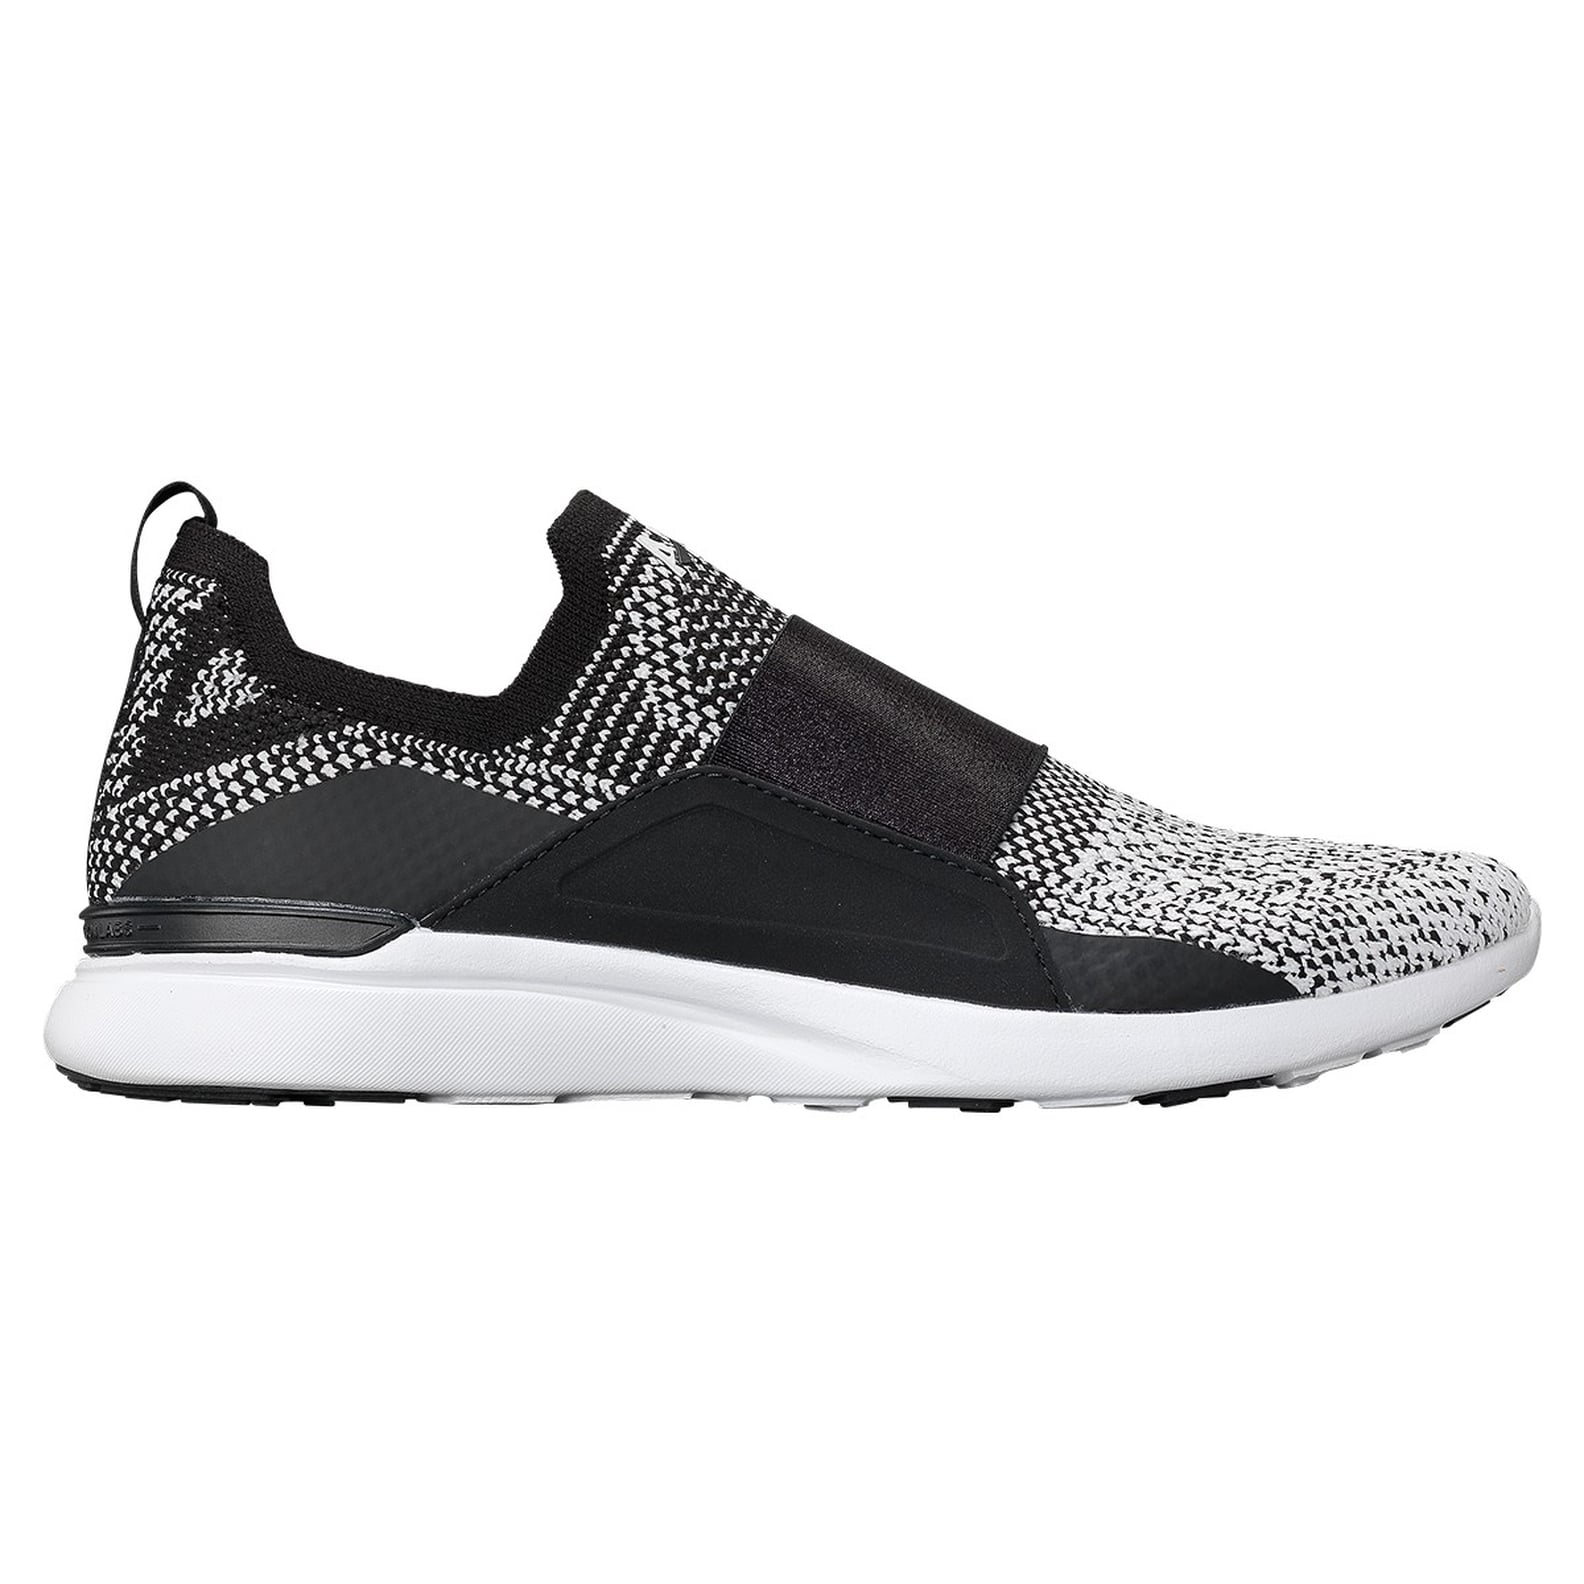 APL TechLoom Sneakers in Neutral Black, White, and Gray | POPSUGAR Fitness